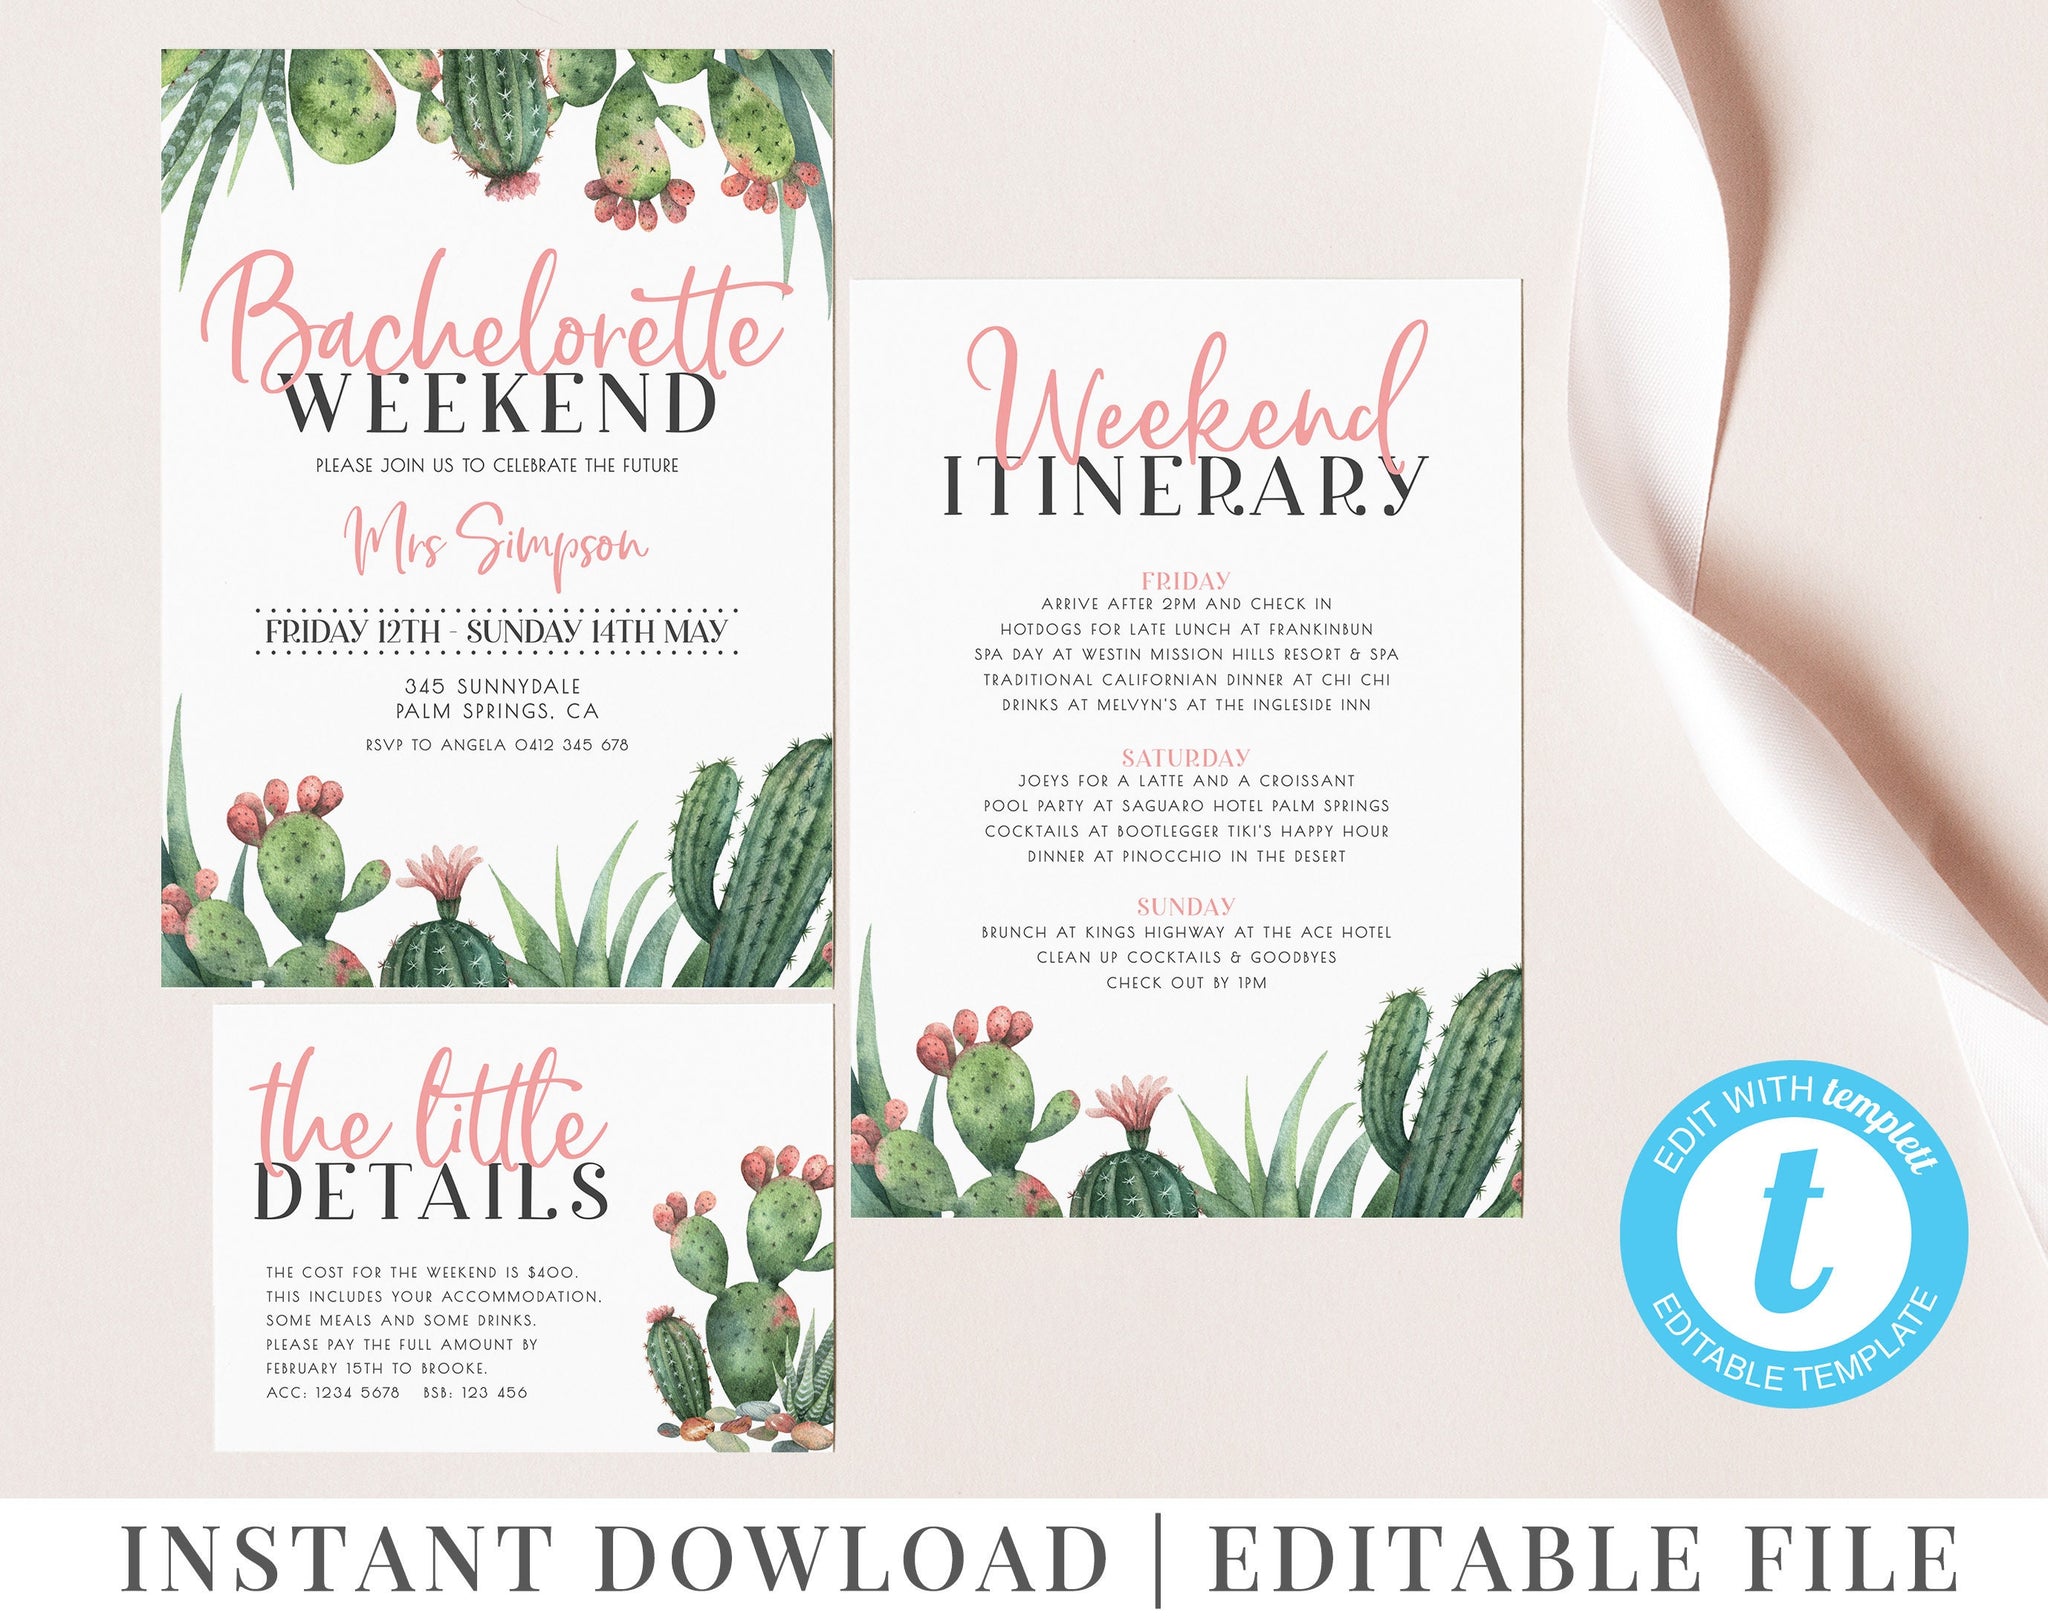 Cactus Bachelorette Party Invitation, Bachelorette Weekend Itinerary, Boho Cactus Invitation, Palm Spring Fiesta, Hen Weekend, Hen Itinerary